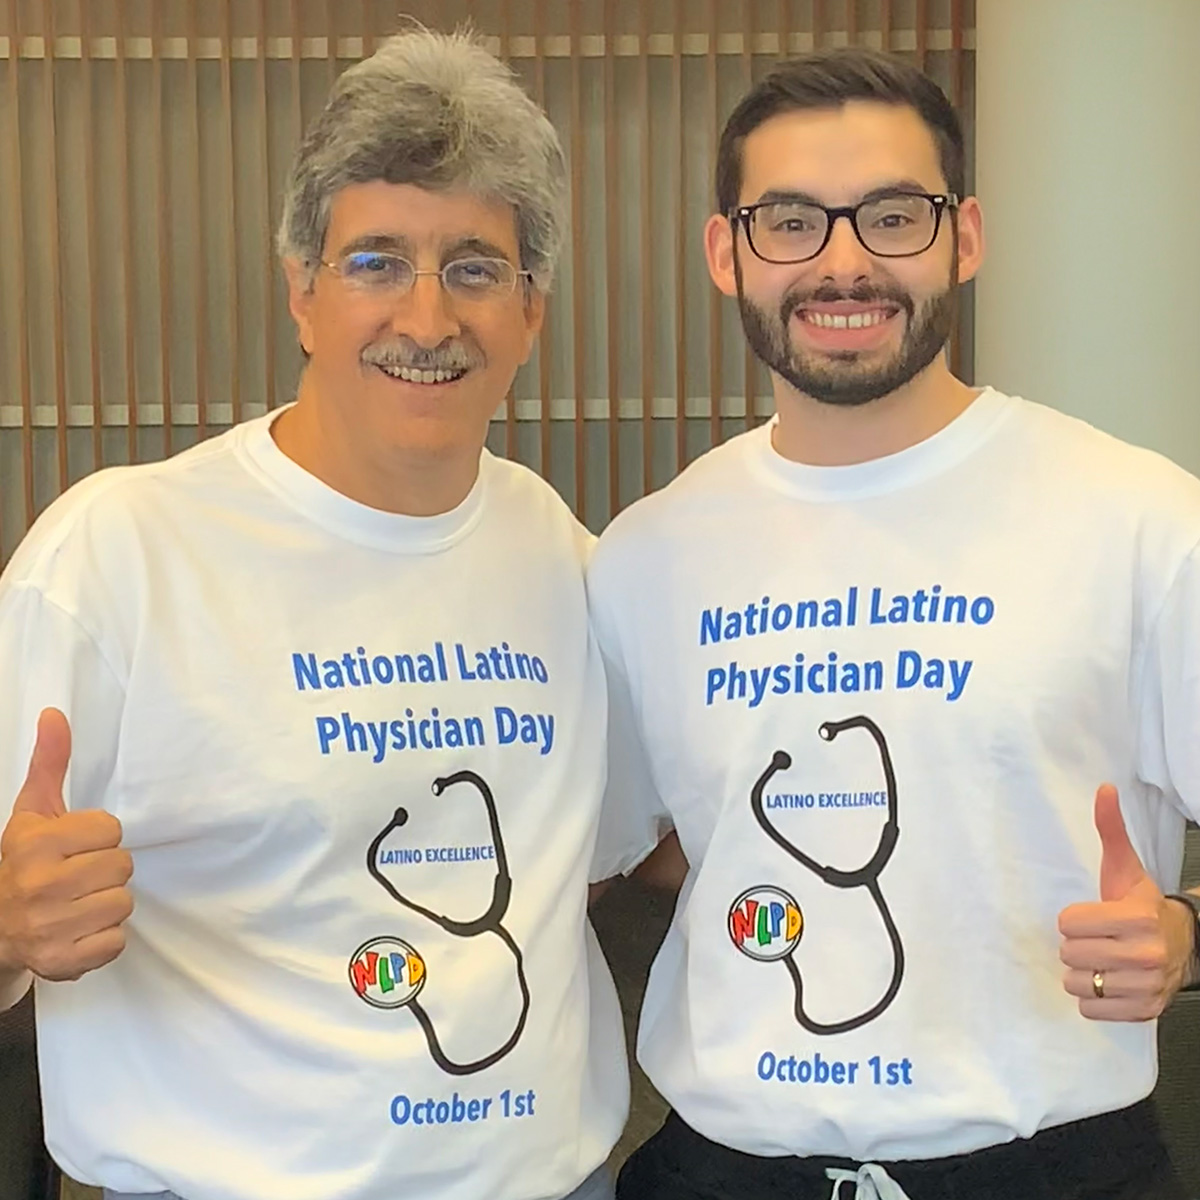 We recognized #NationalLatinoPhysicianDay on Oct. 1. Only about 7% of physicians are Latino. The day is devoted to raising awareness of the need for more Latino and Latina physicians. @lmsanational #HispanicHeritageMonth